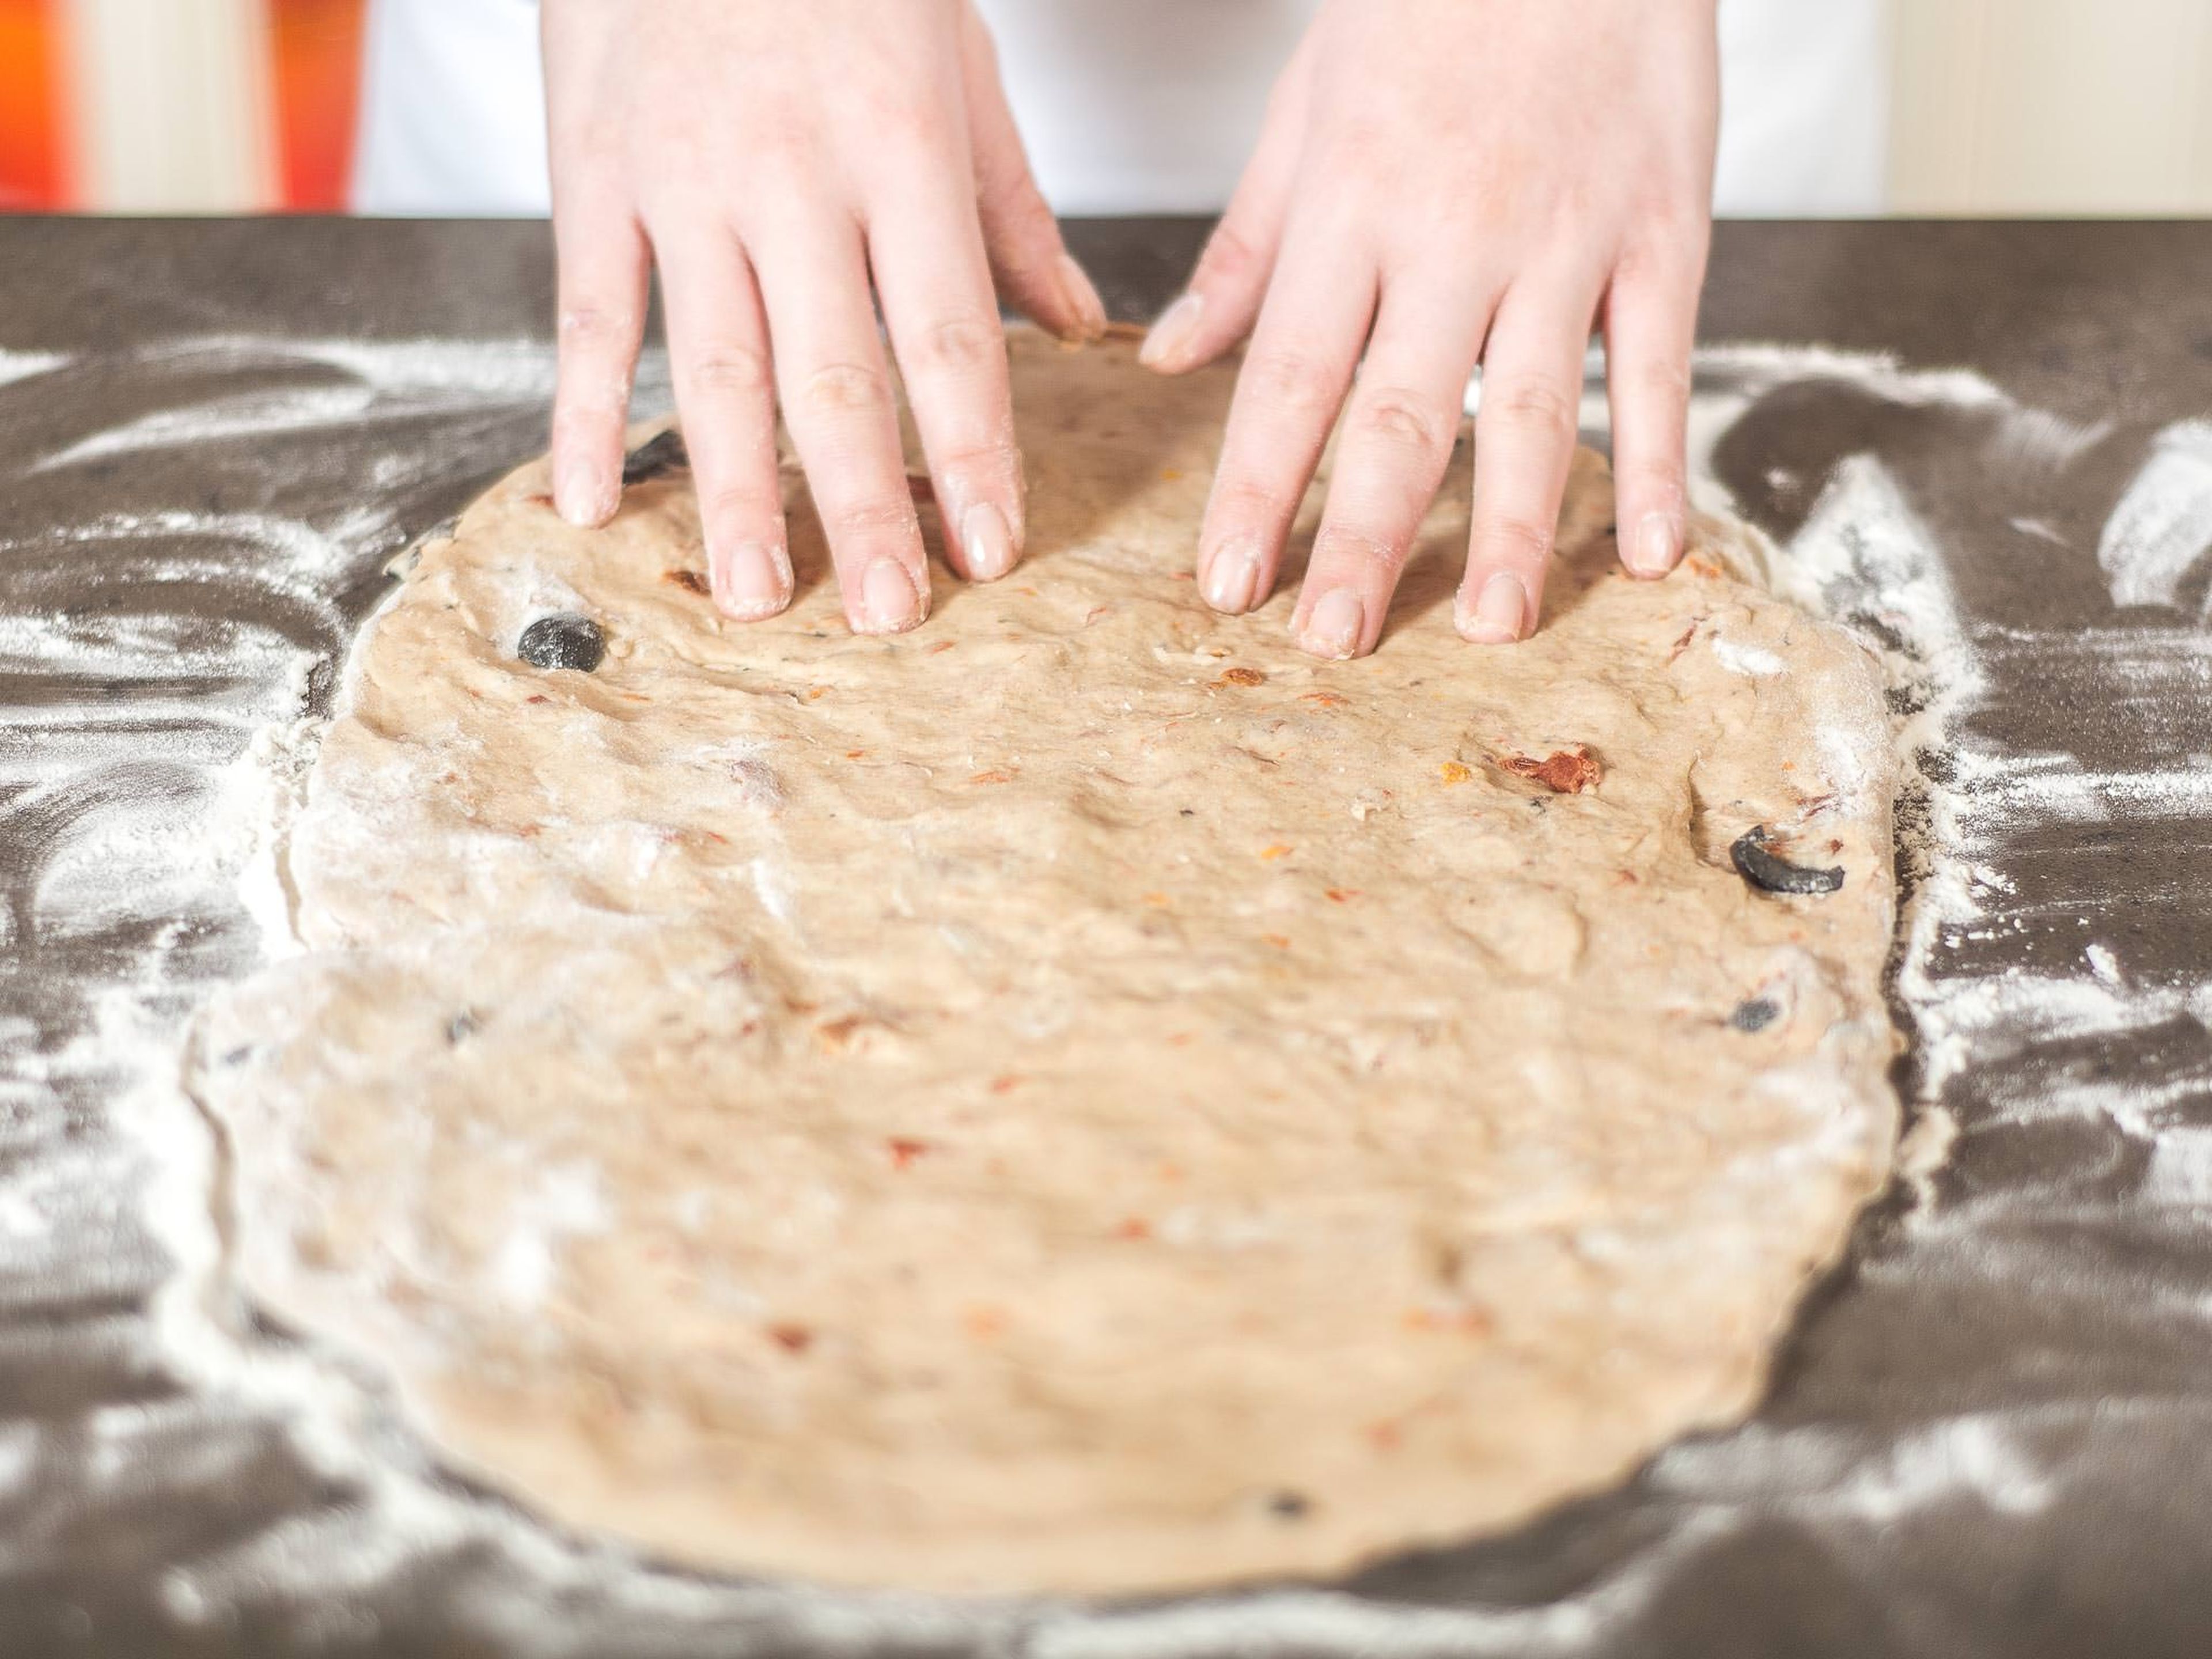 On a lightly floured work surface, work the dough into an approx. 1.5 cm thick leaf shape.